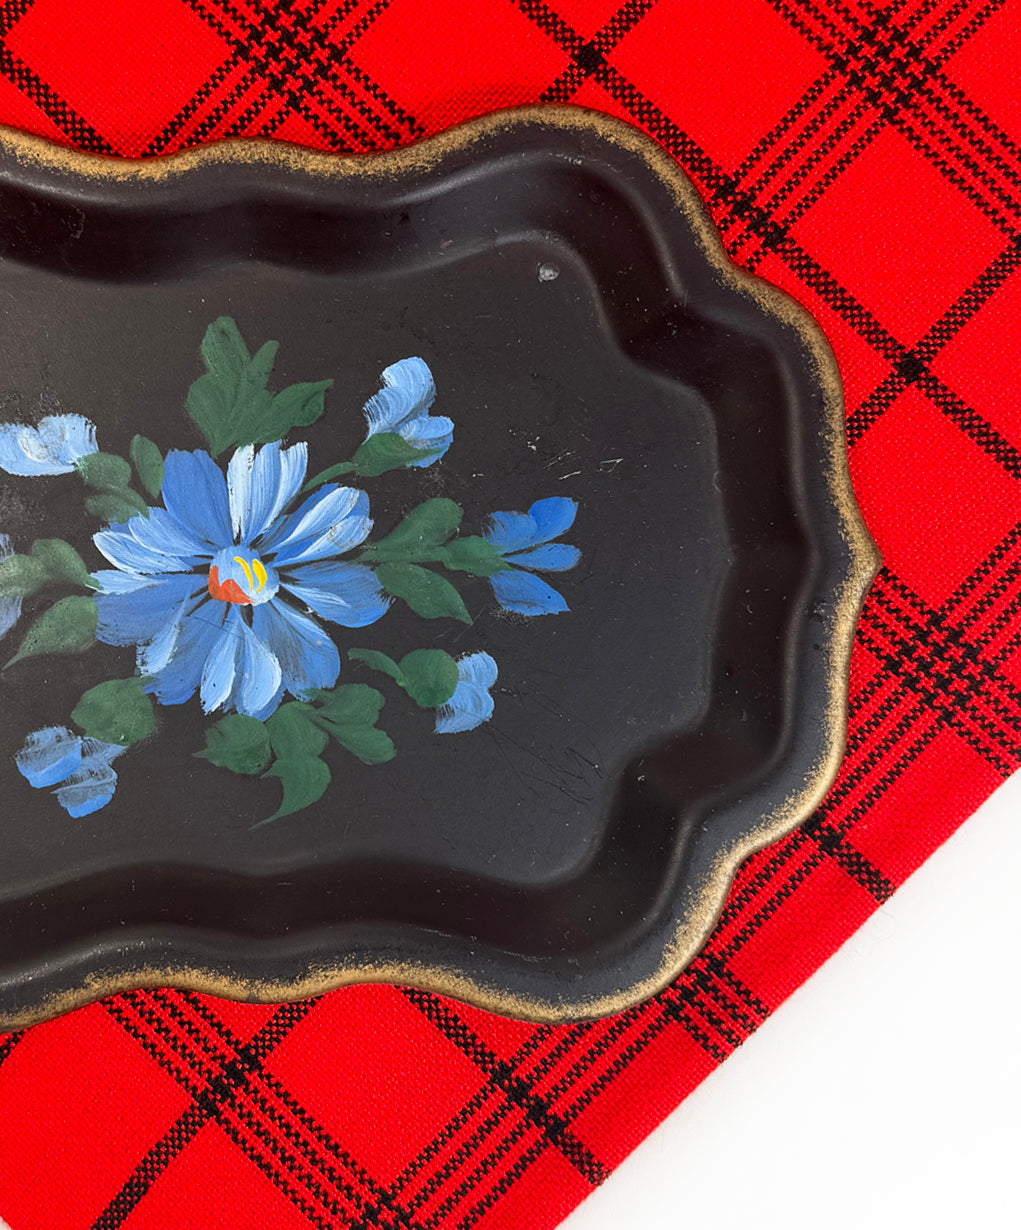 Handpainted Black Floral Tray - Late to the Party